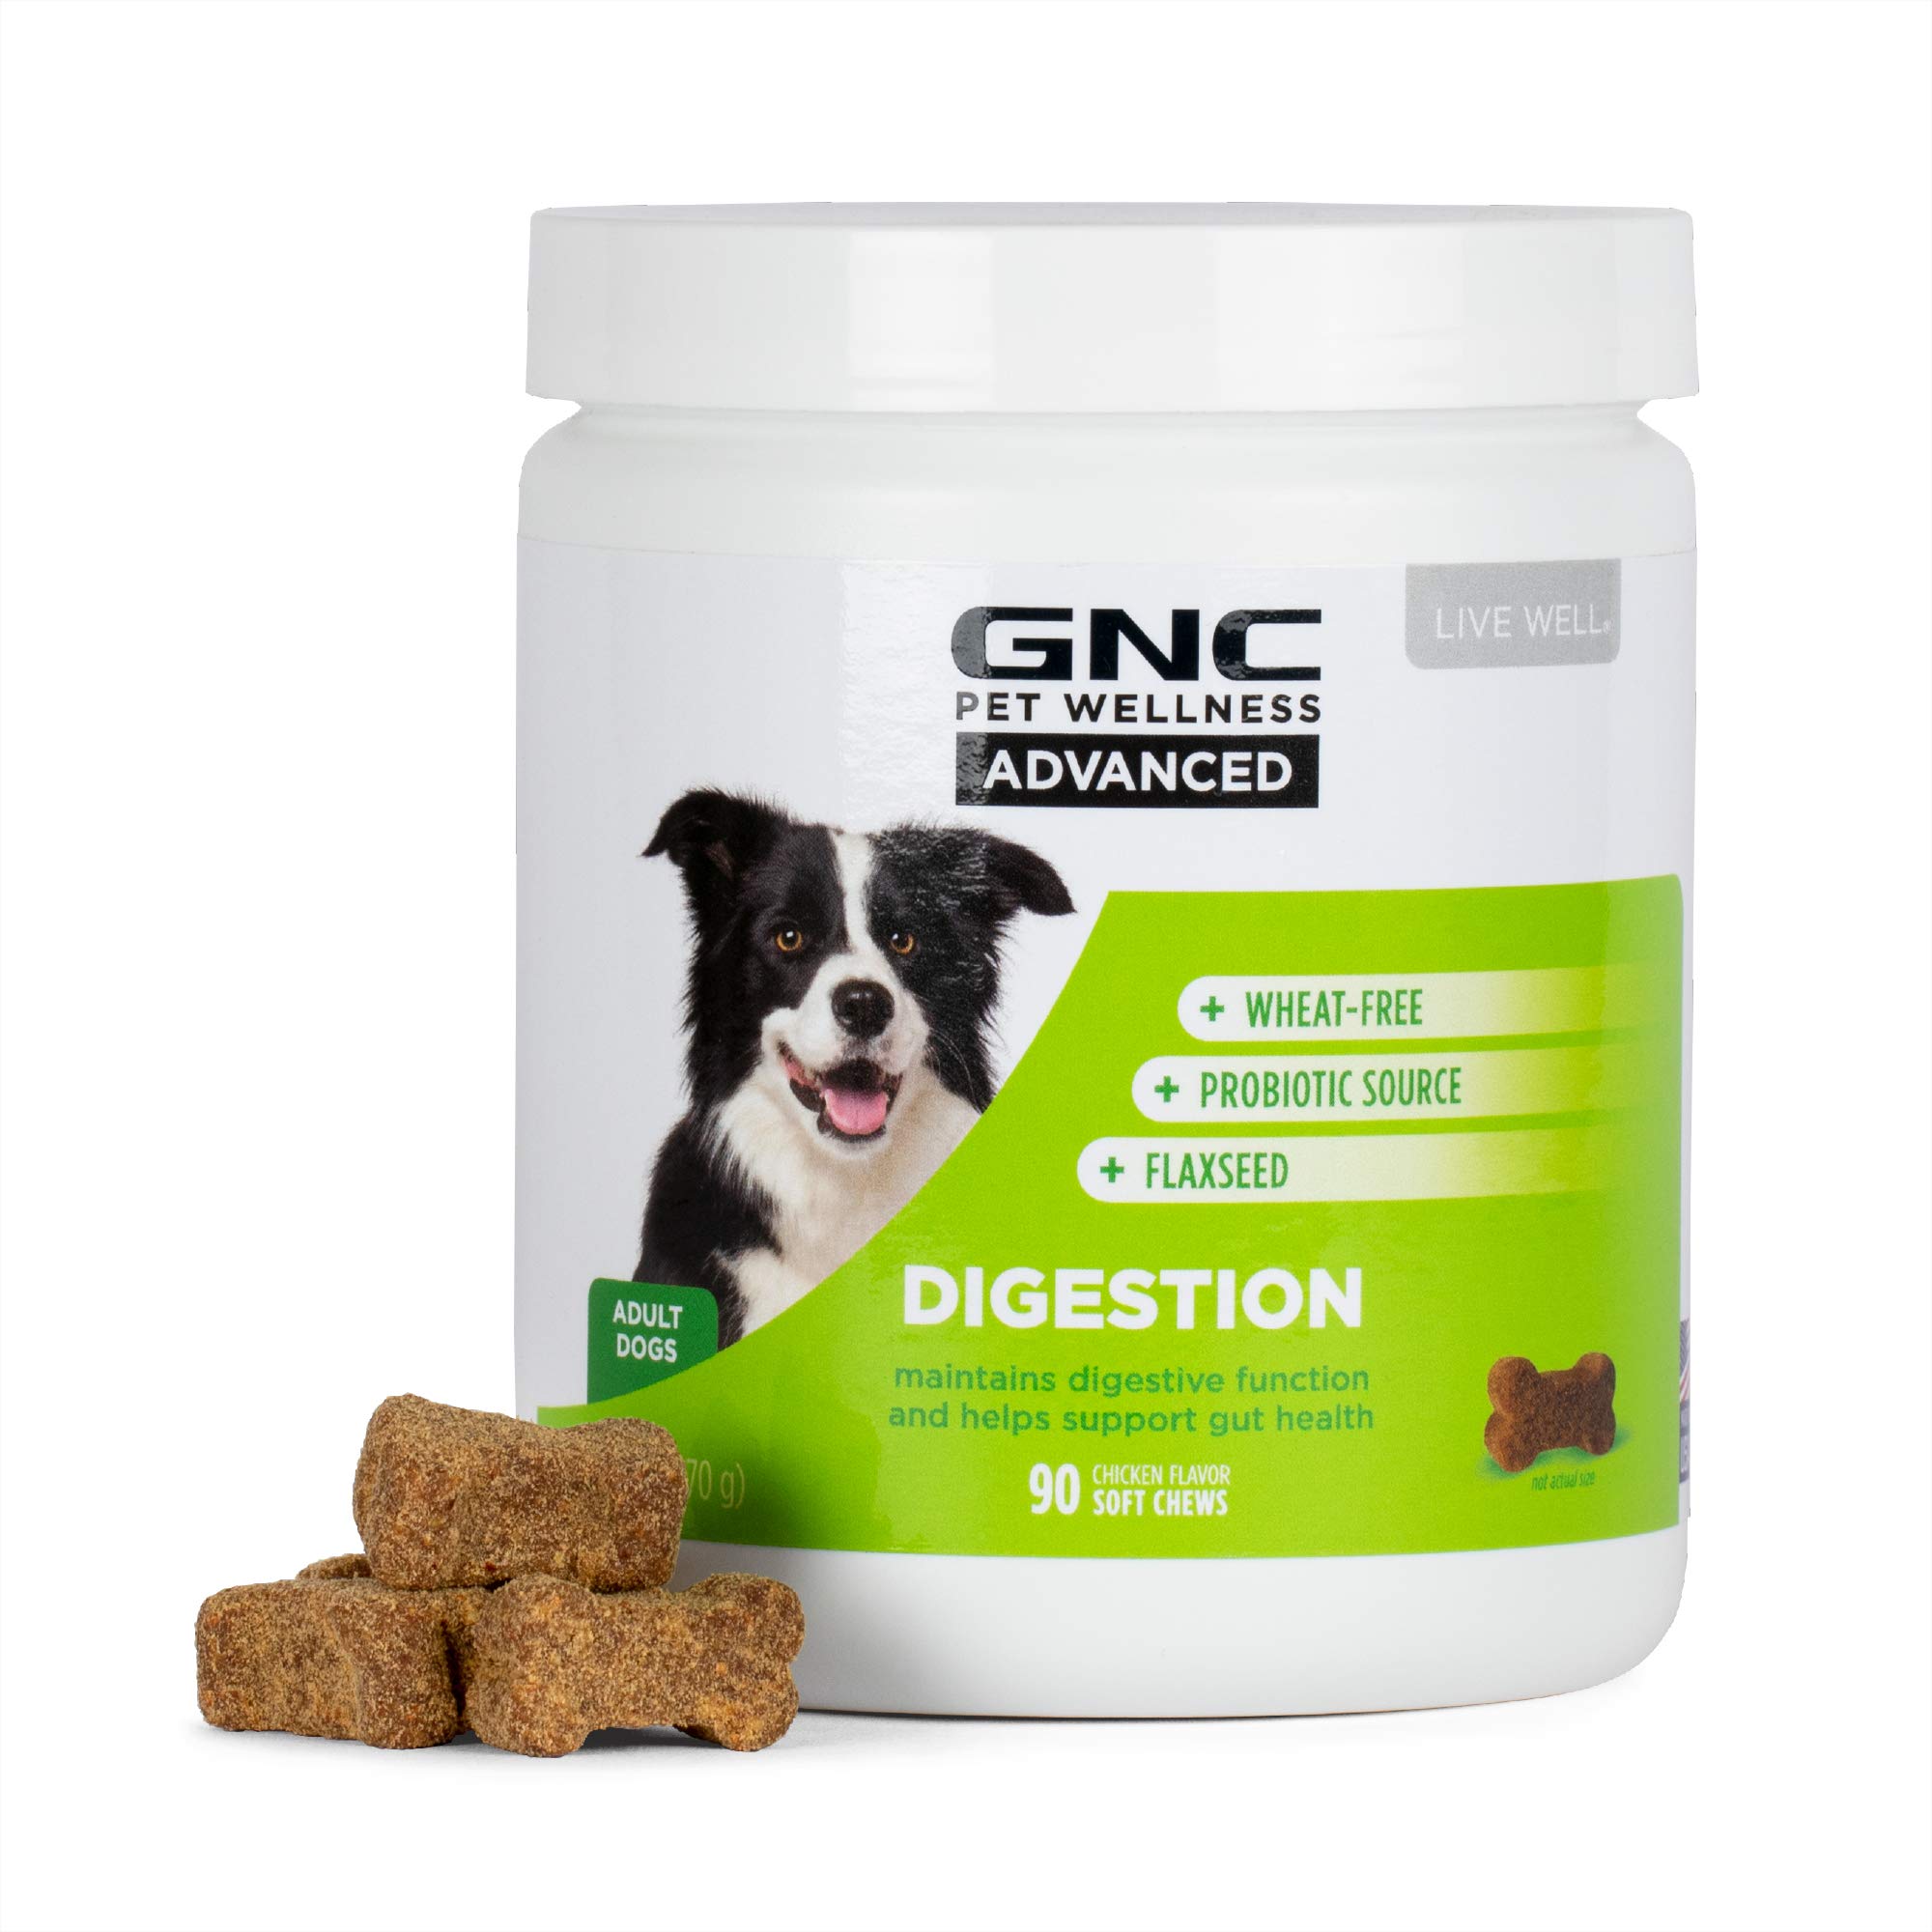 90-Ct GNC Pet Wellness Advanced Dog Soft Chew Digestive Supplements w/ Flaxseed & Probiotics (Chicken) $12.80 w/ S&S + Free Shipping w/ Prime or on $25+